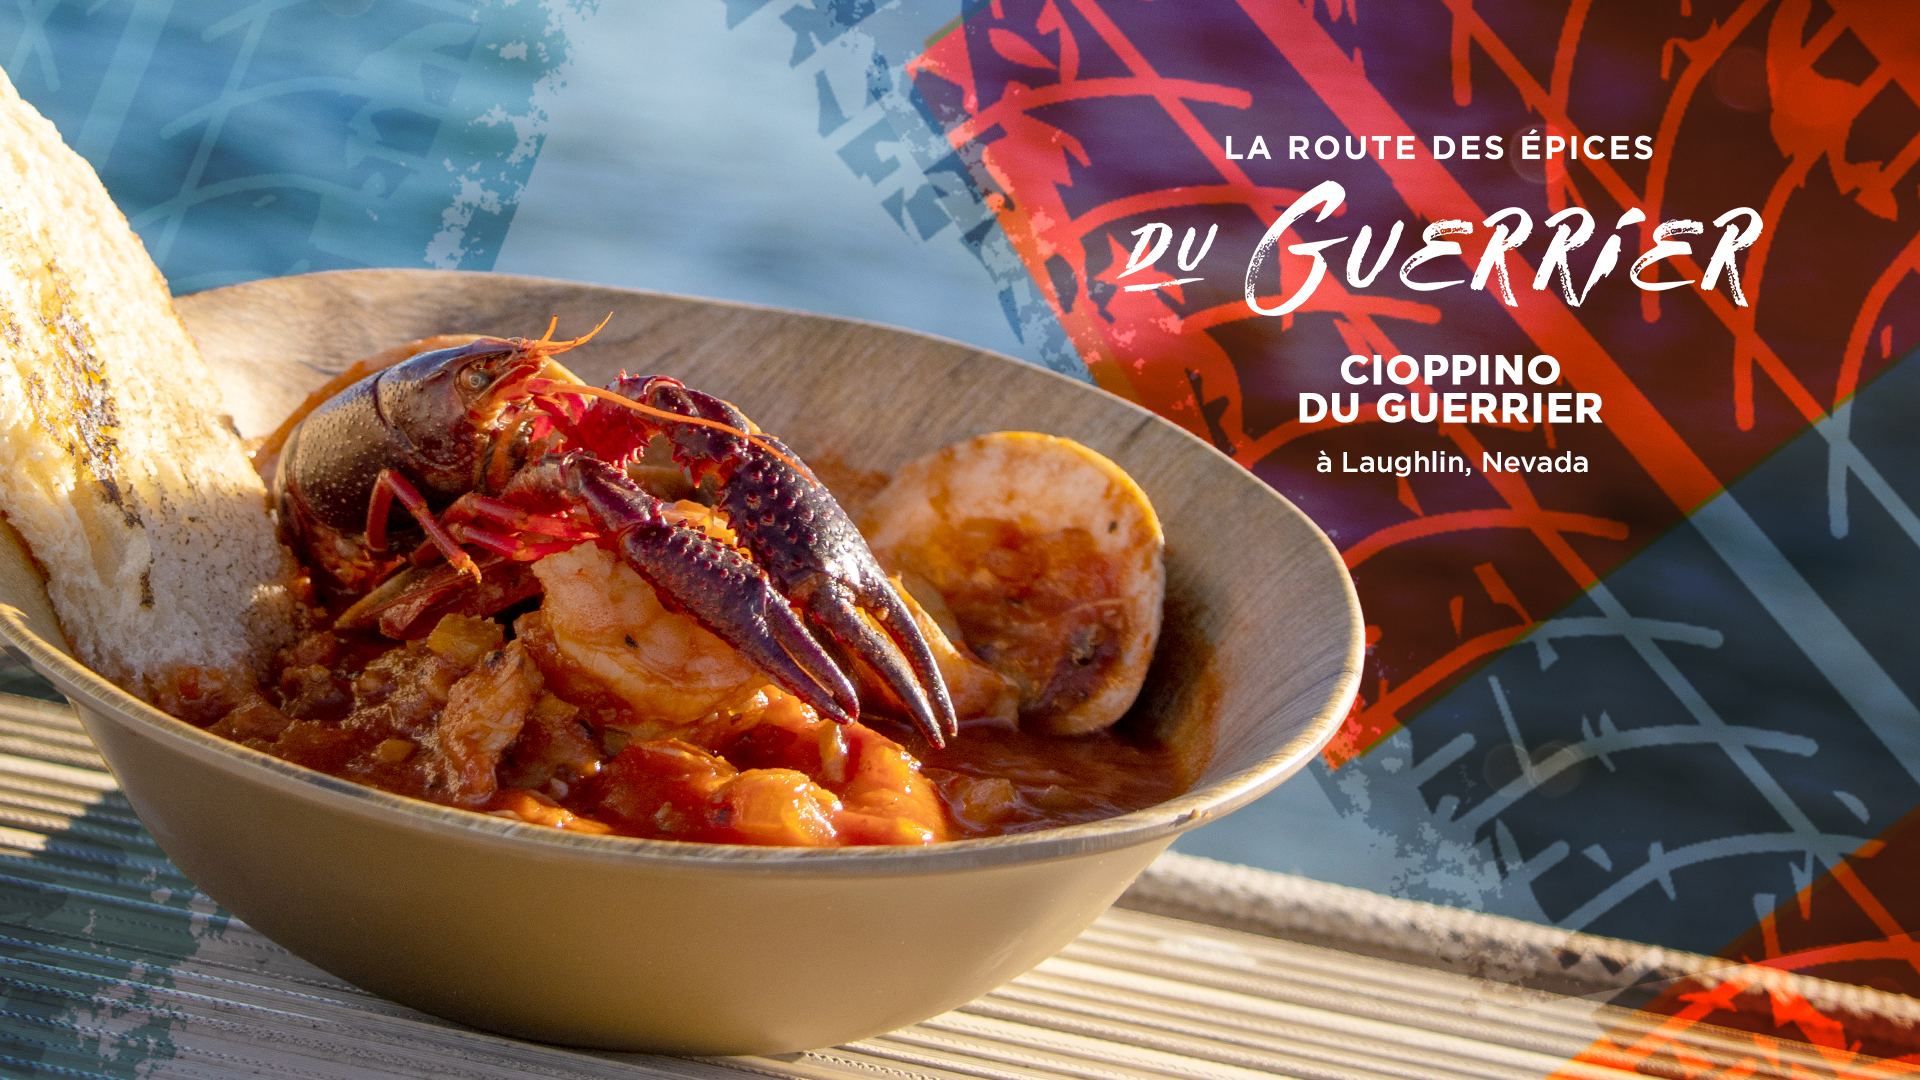 Image of Cioppino du Guerrier